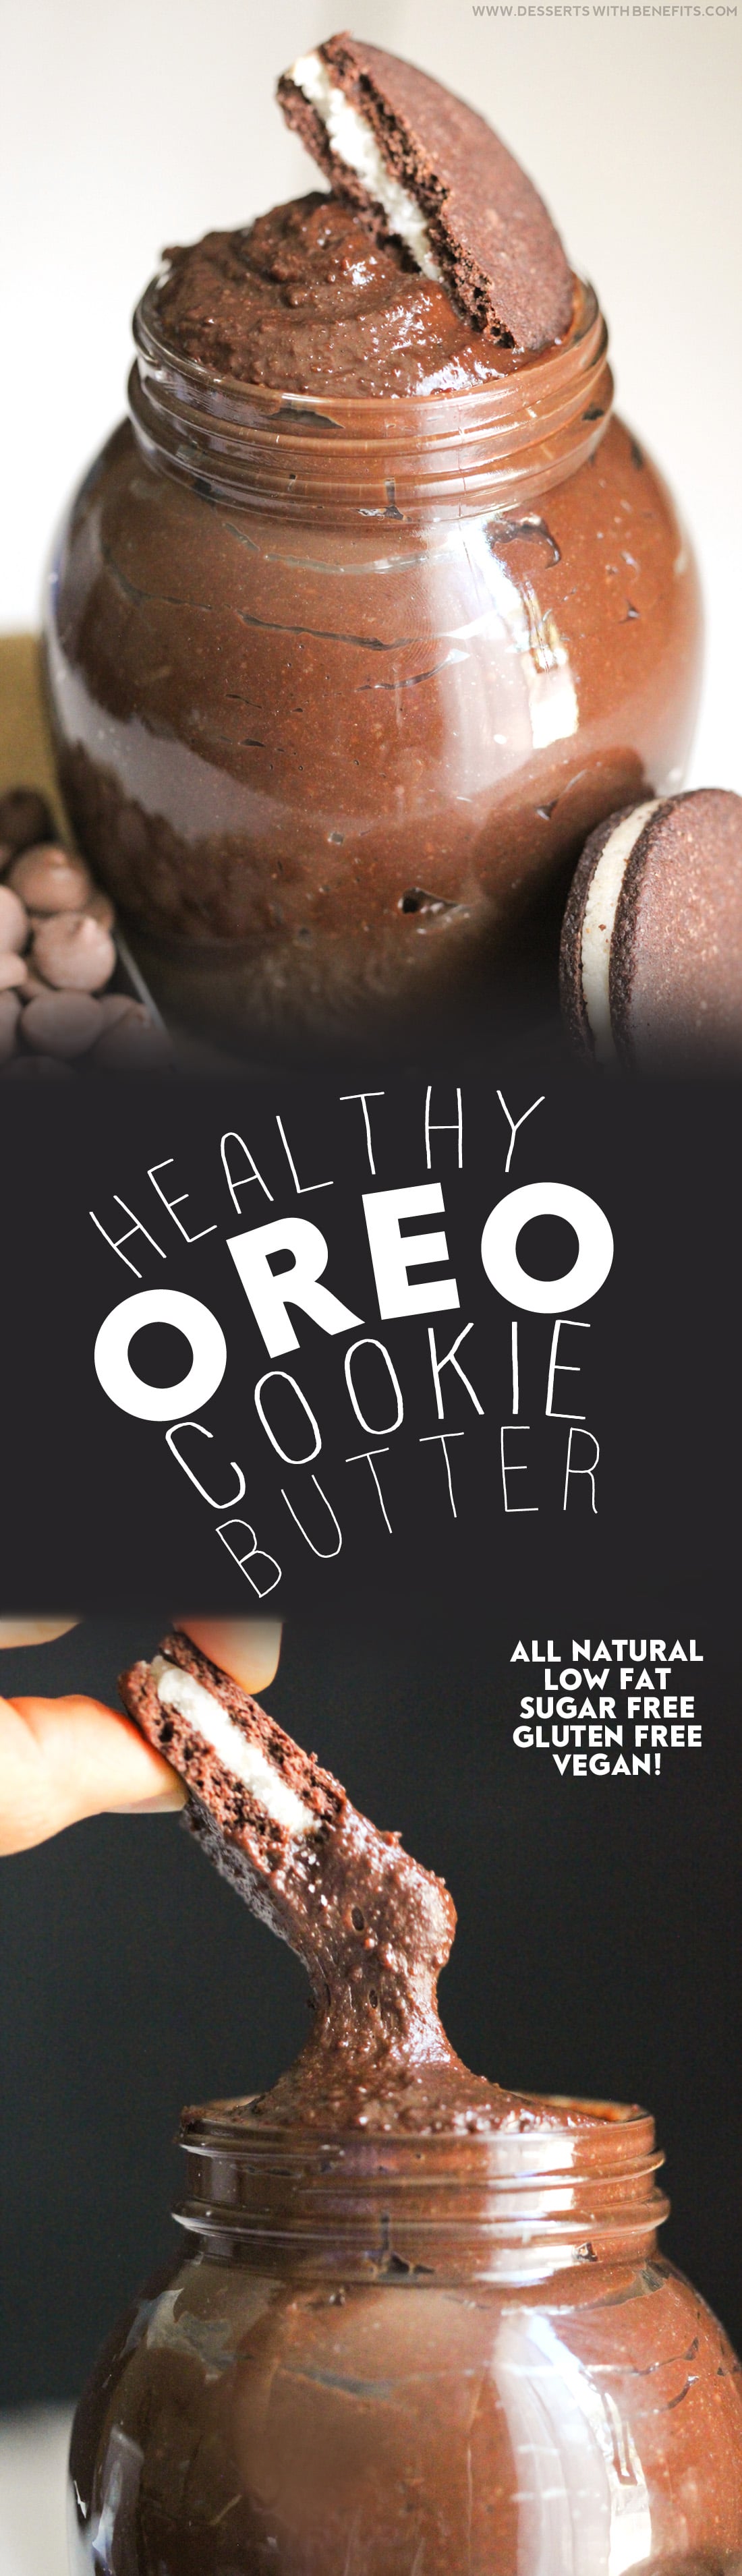 Healthy Oreo Cookie Butter recipe -- thick, rich, sweet, and chocolatey, it’ll beat peanut butter and almond butter ANY DAY! You’d never know it’s sugar free, low calorie, low fat, gluten free, dairy free, and vegan! Healthy Dessert Recipes at Desserts with Benefits